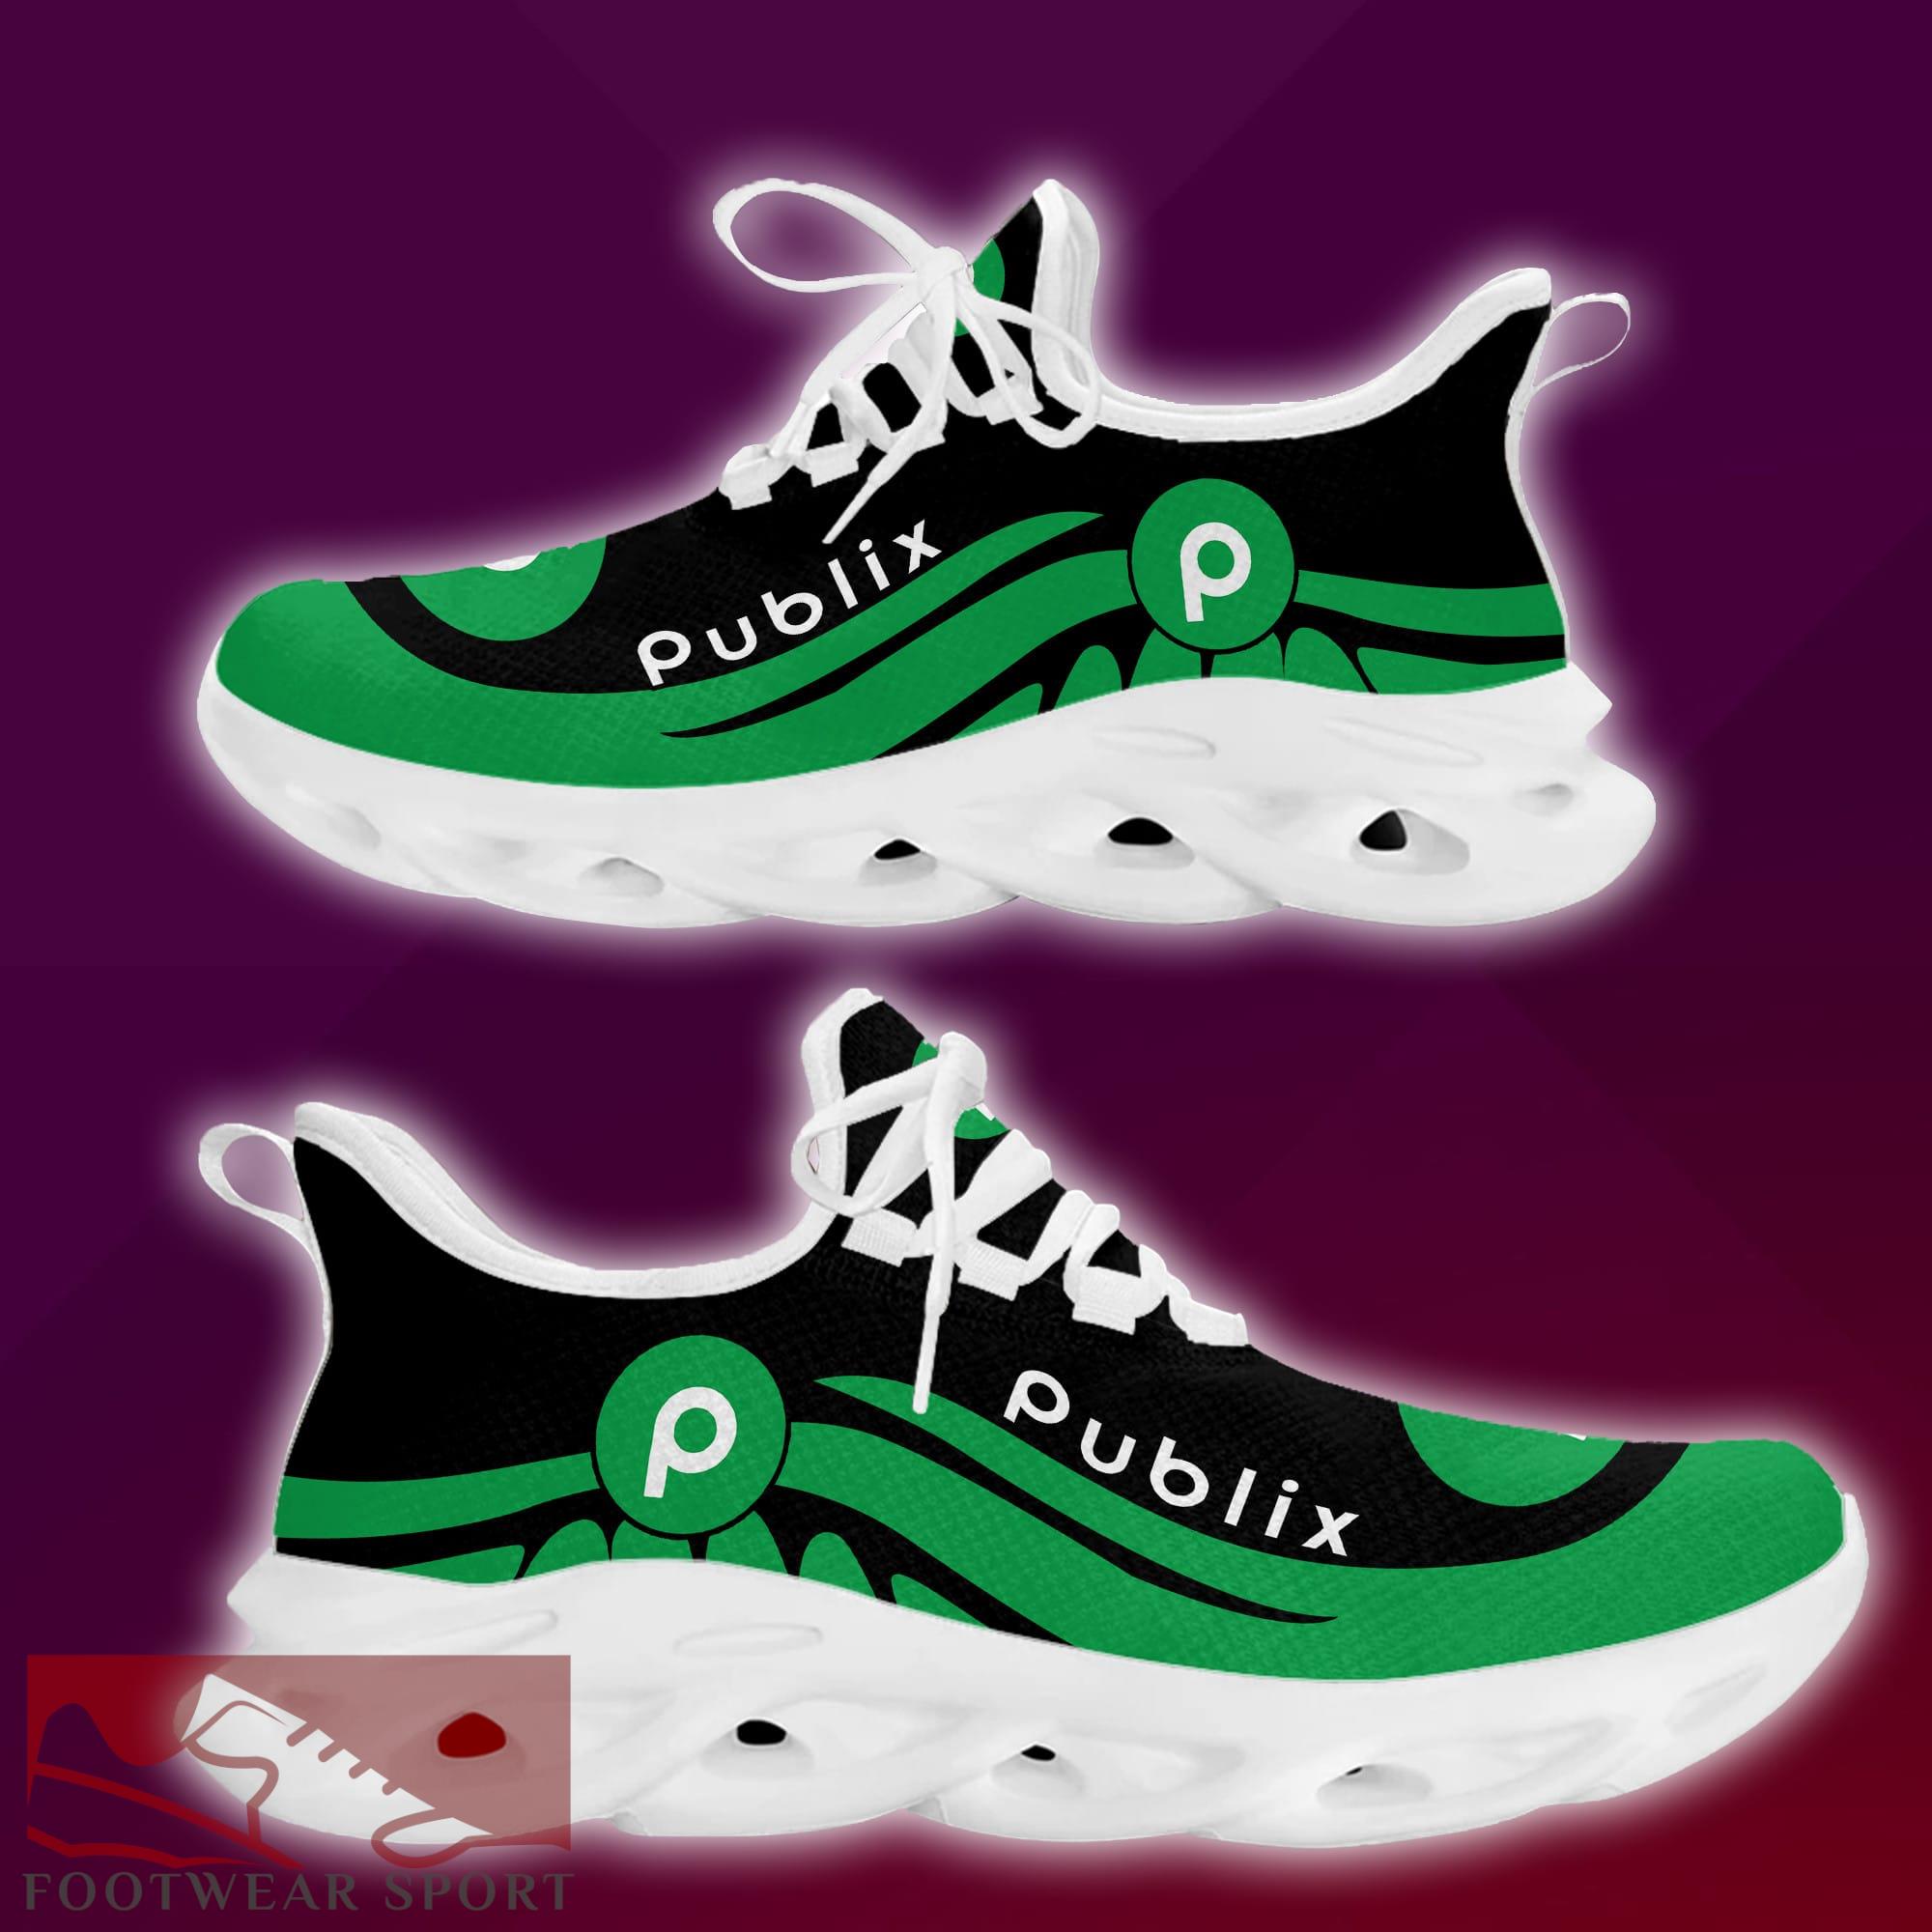 publix Brand New Logo Max Soul Sneakers Recognition Chunky Shoes Gift - publix New Brand Chunky Shoes Style Max Soul Sneakers Photo 2